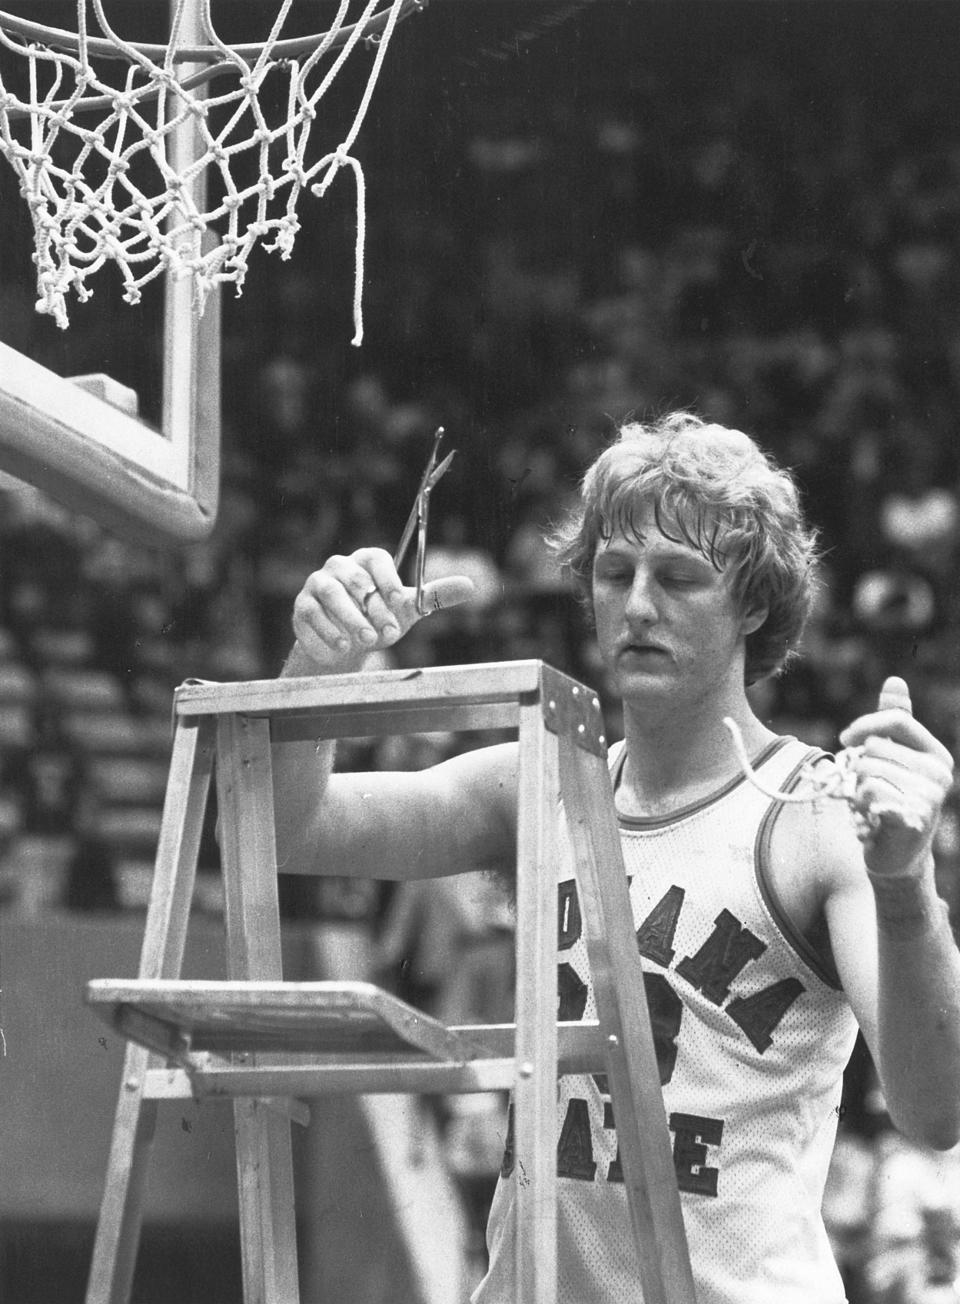 Larry Bird cuts down the net after Indiana State University won the championship game in the Missouri Valley tournament on March 3, 1979. Bird suffered a triple hairline fracture of his left thumb in the game. That year ISU faced Michigan State in the NCAA finals but lost to the Spartans (and Magic Johnson) on March 26,1979,in Salt Lake City.